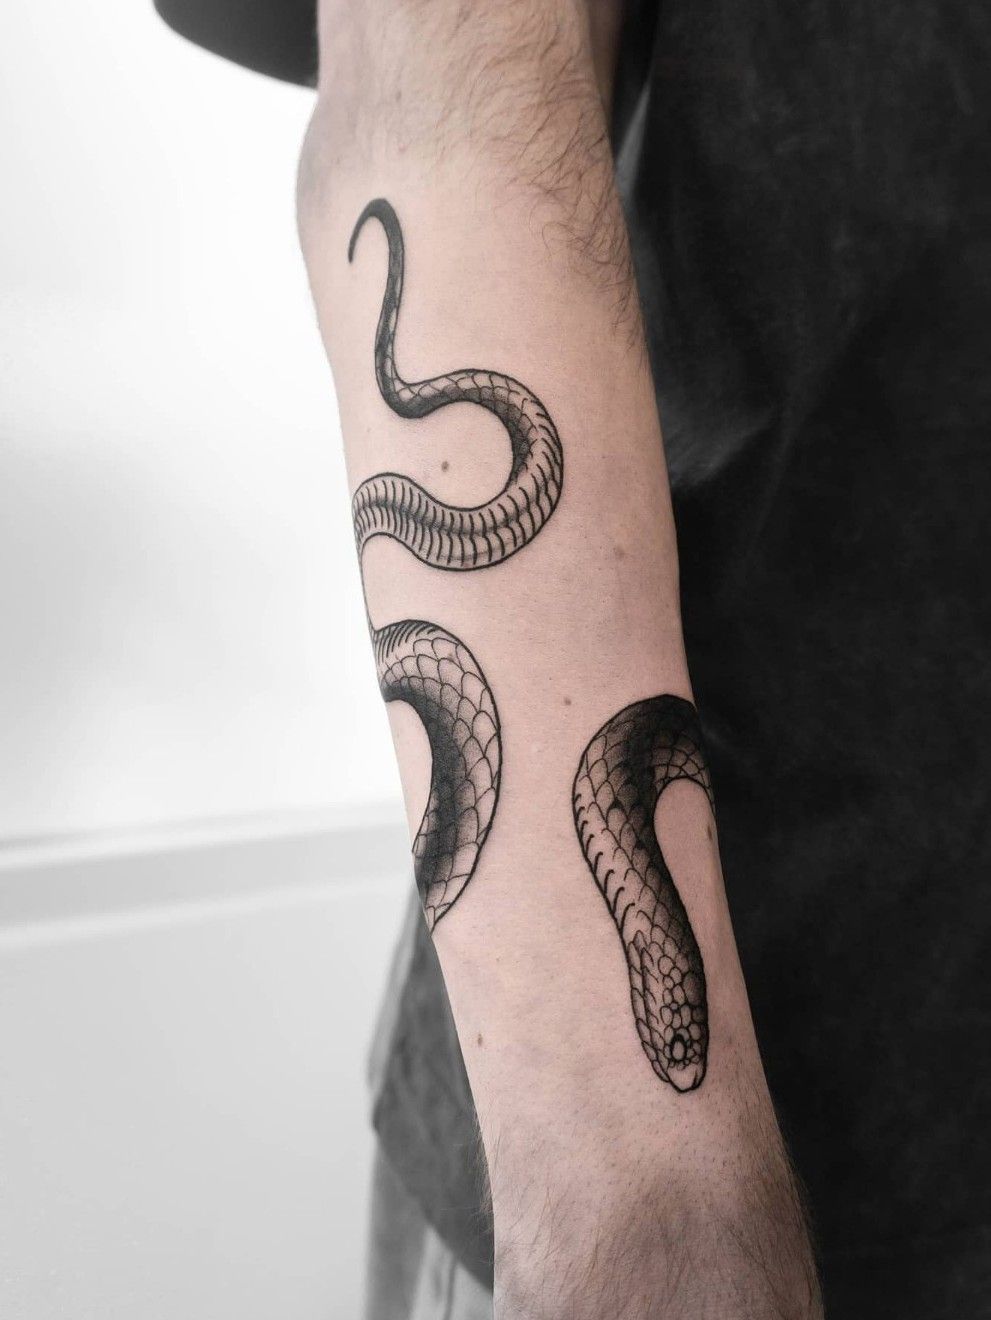 Get Inspired With These Snake Tattoo Ideas For Your Upper Arm